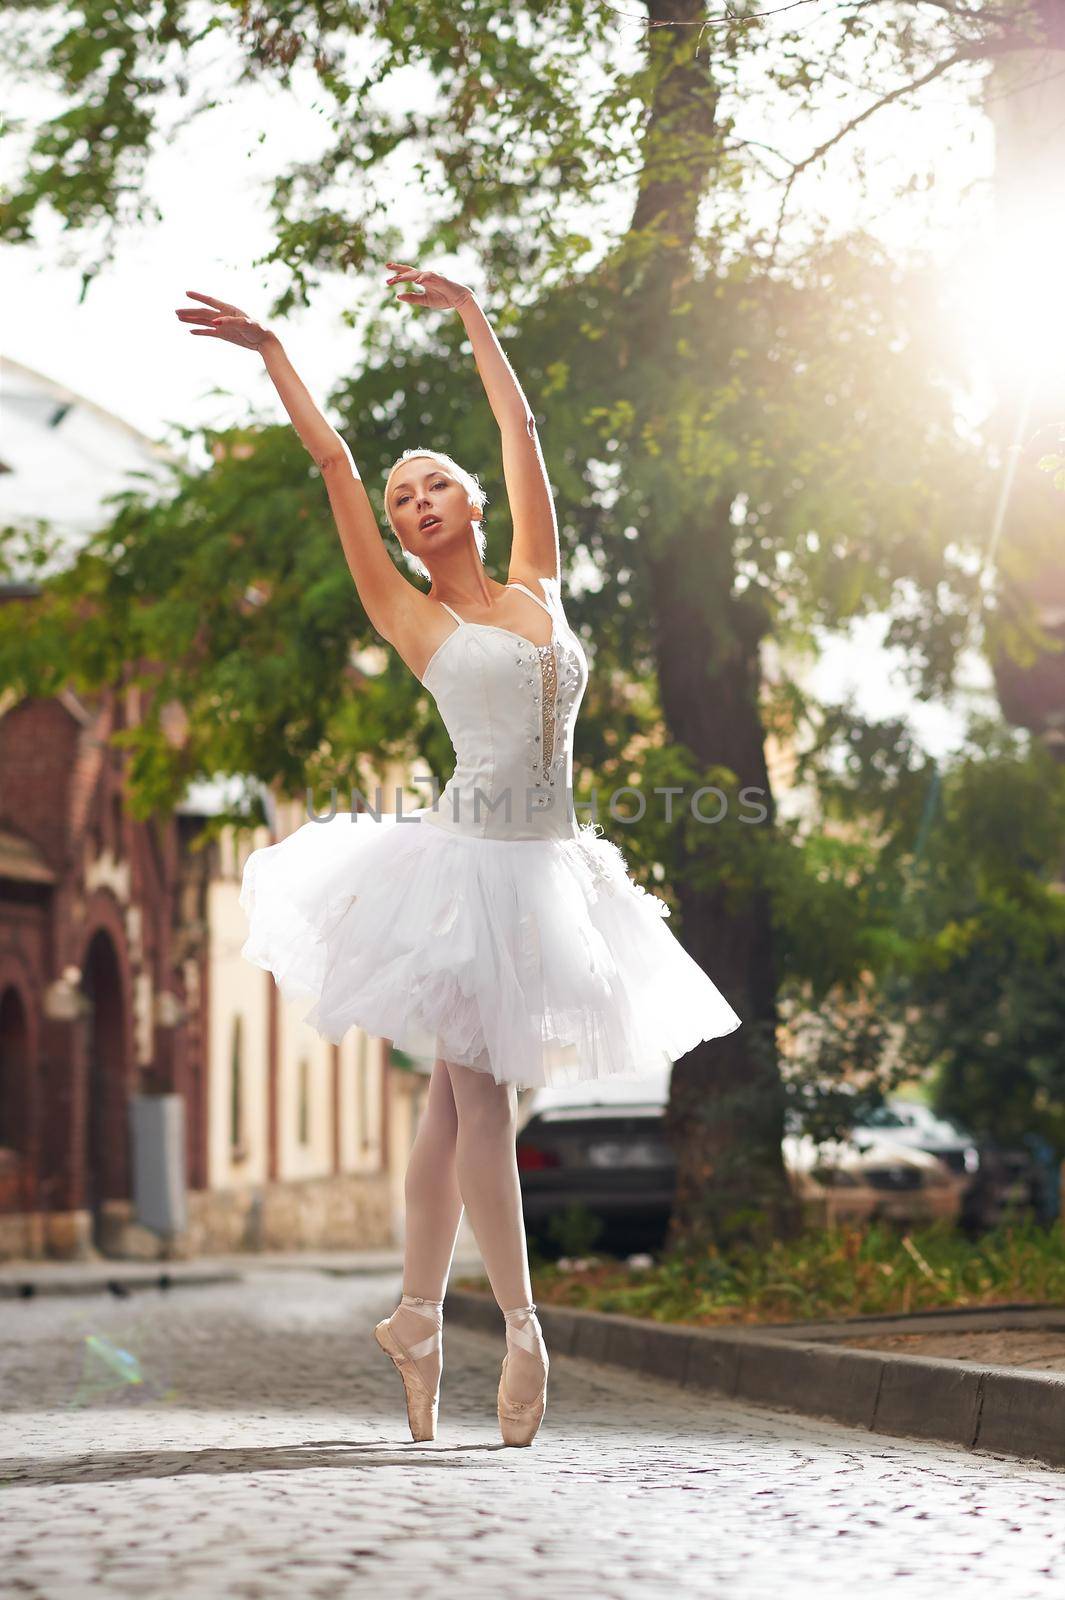 Vertical shot of a beautiful ballerina dancing on the street of an old town on a beautiful sunny warm day outdoors grace sensuality femininity beauty.